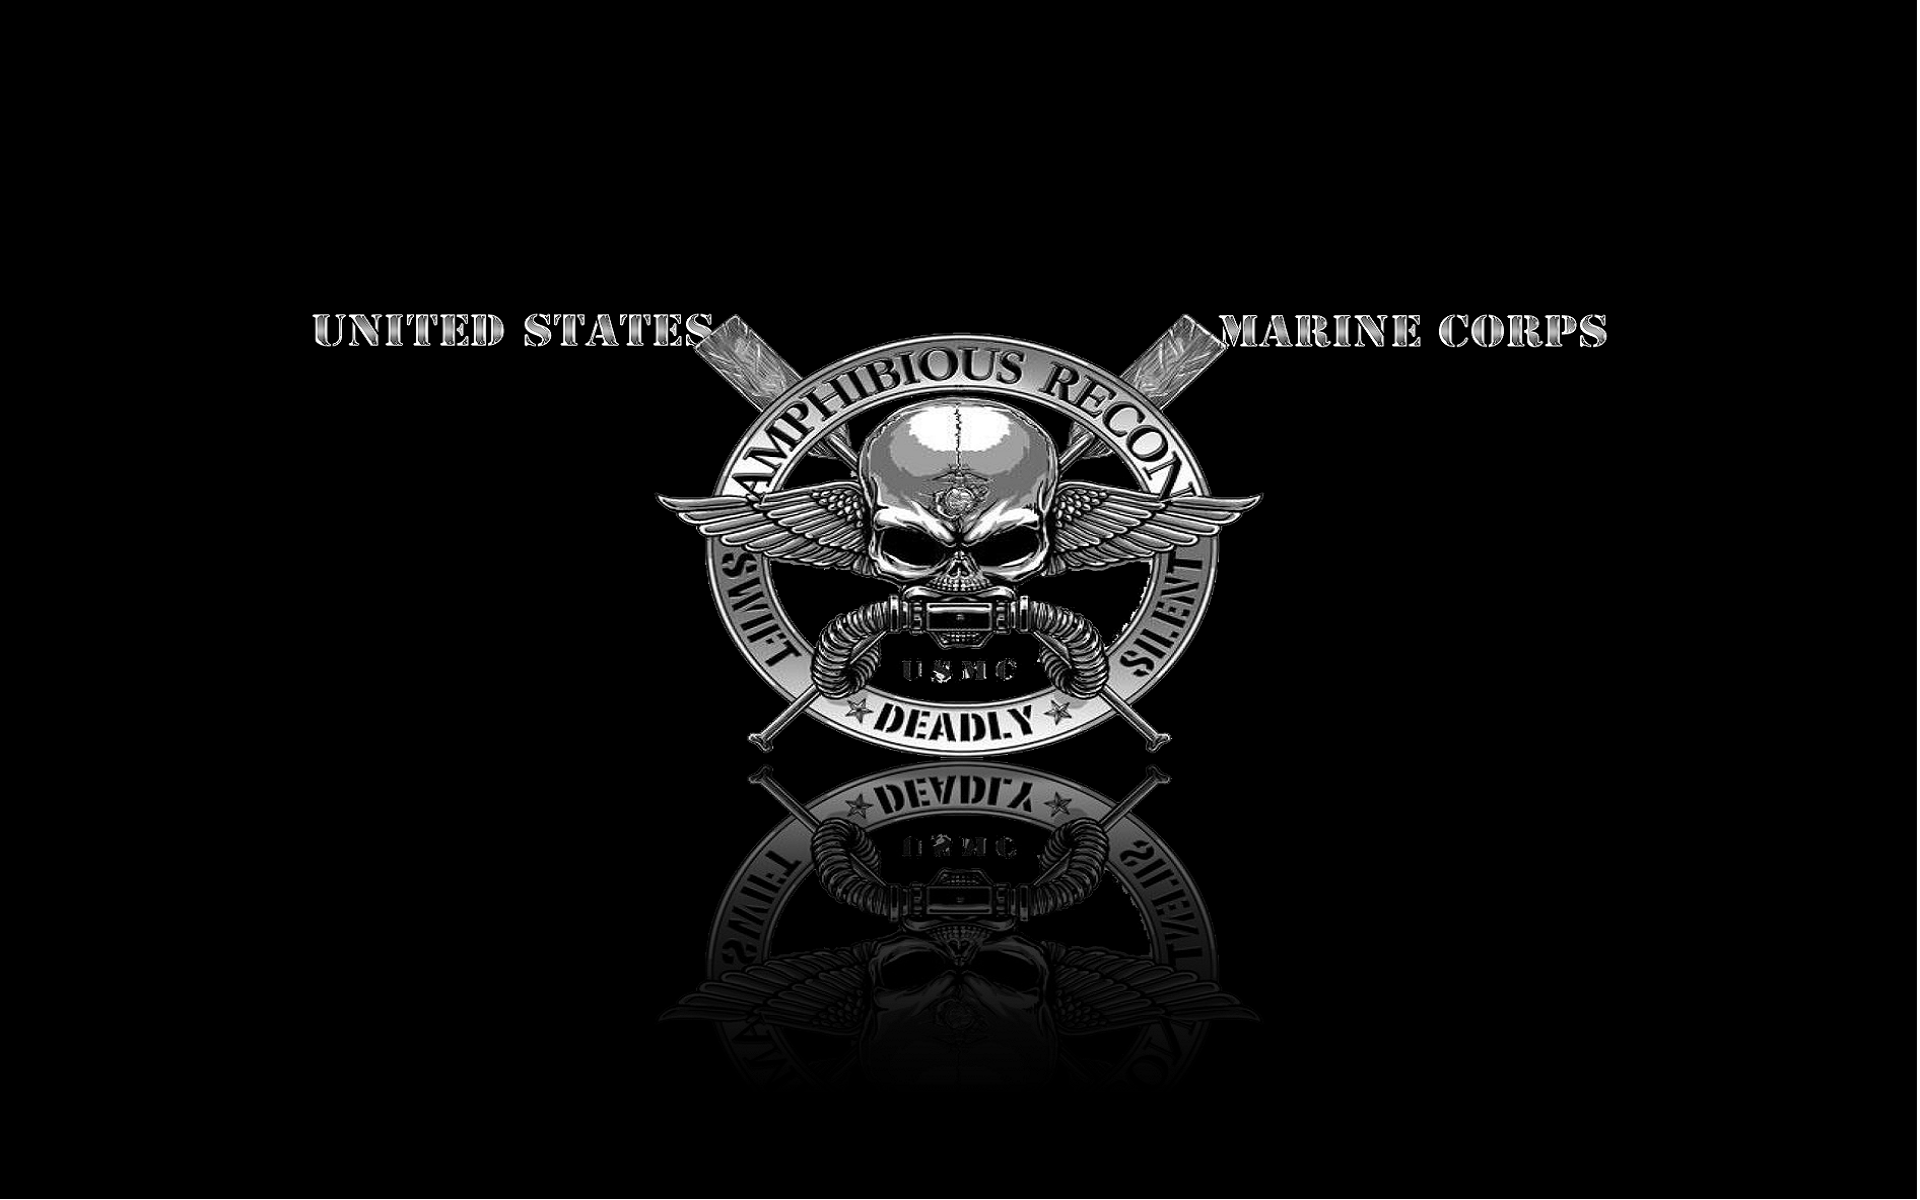 Usmc Logo Wallpaper Pictures To Pin Pinsdaddy